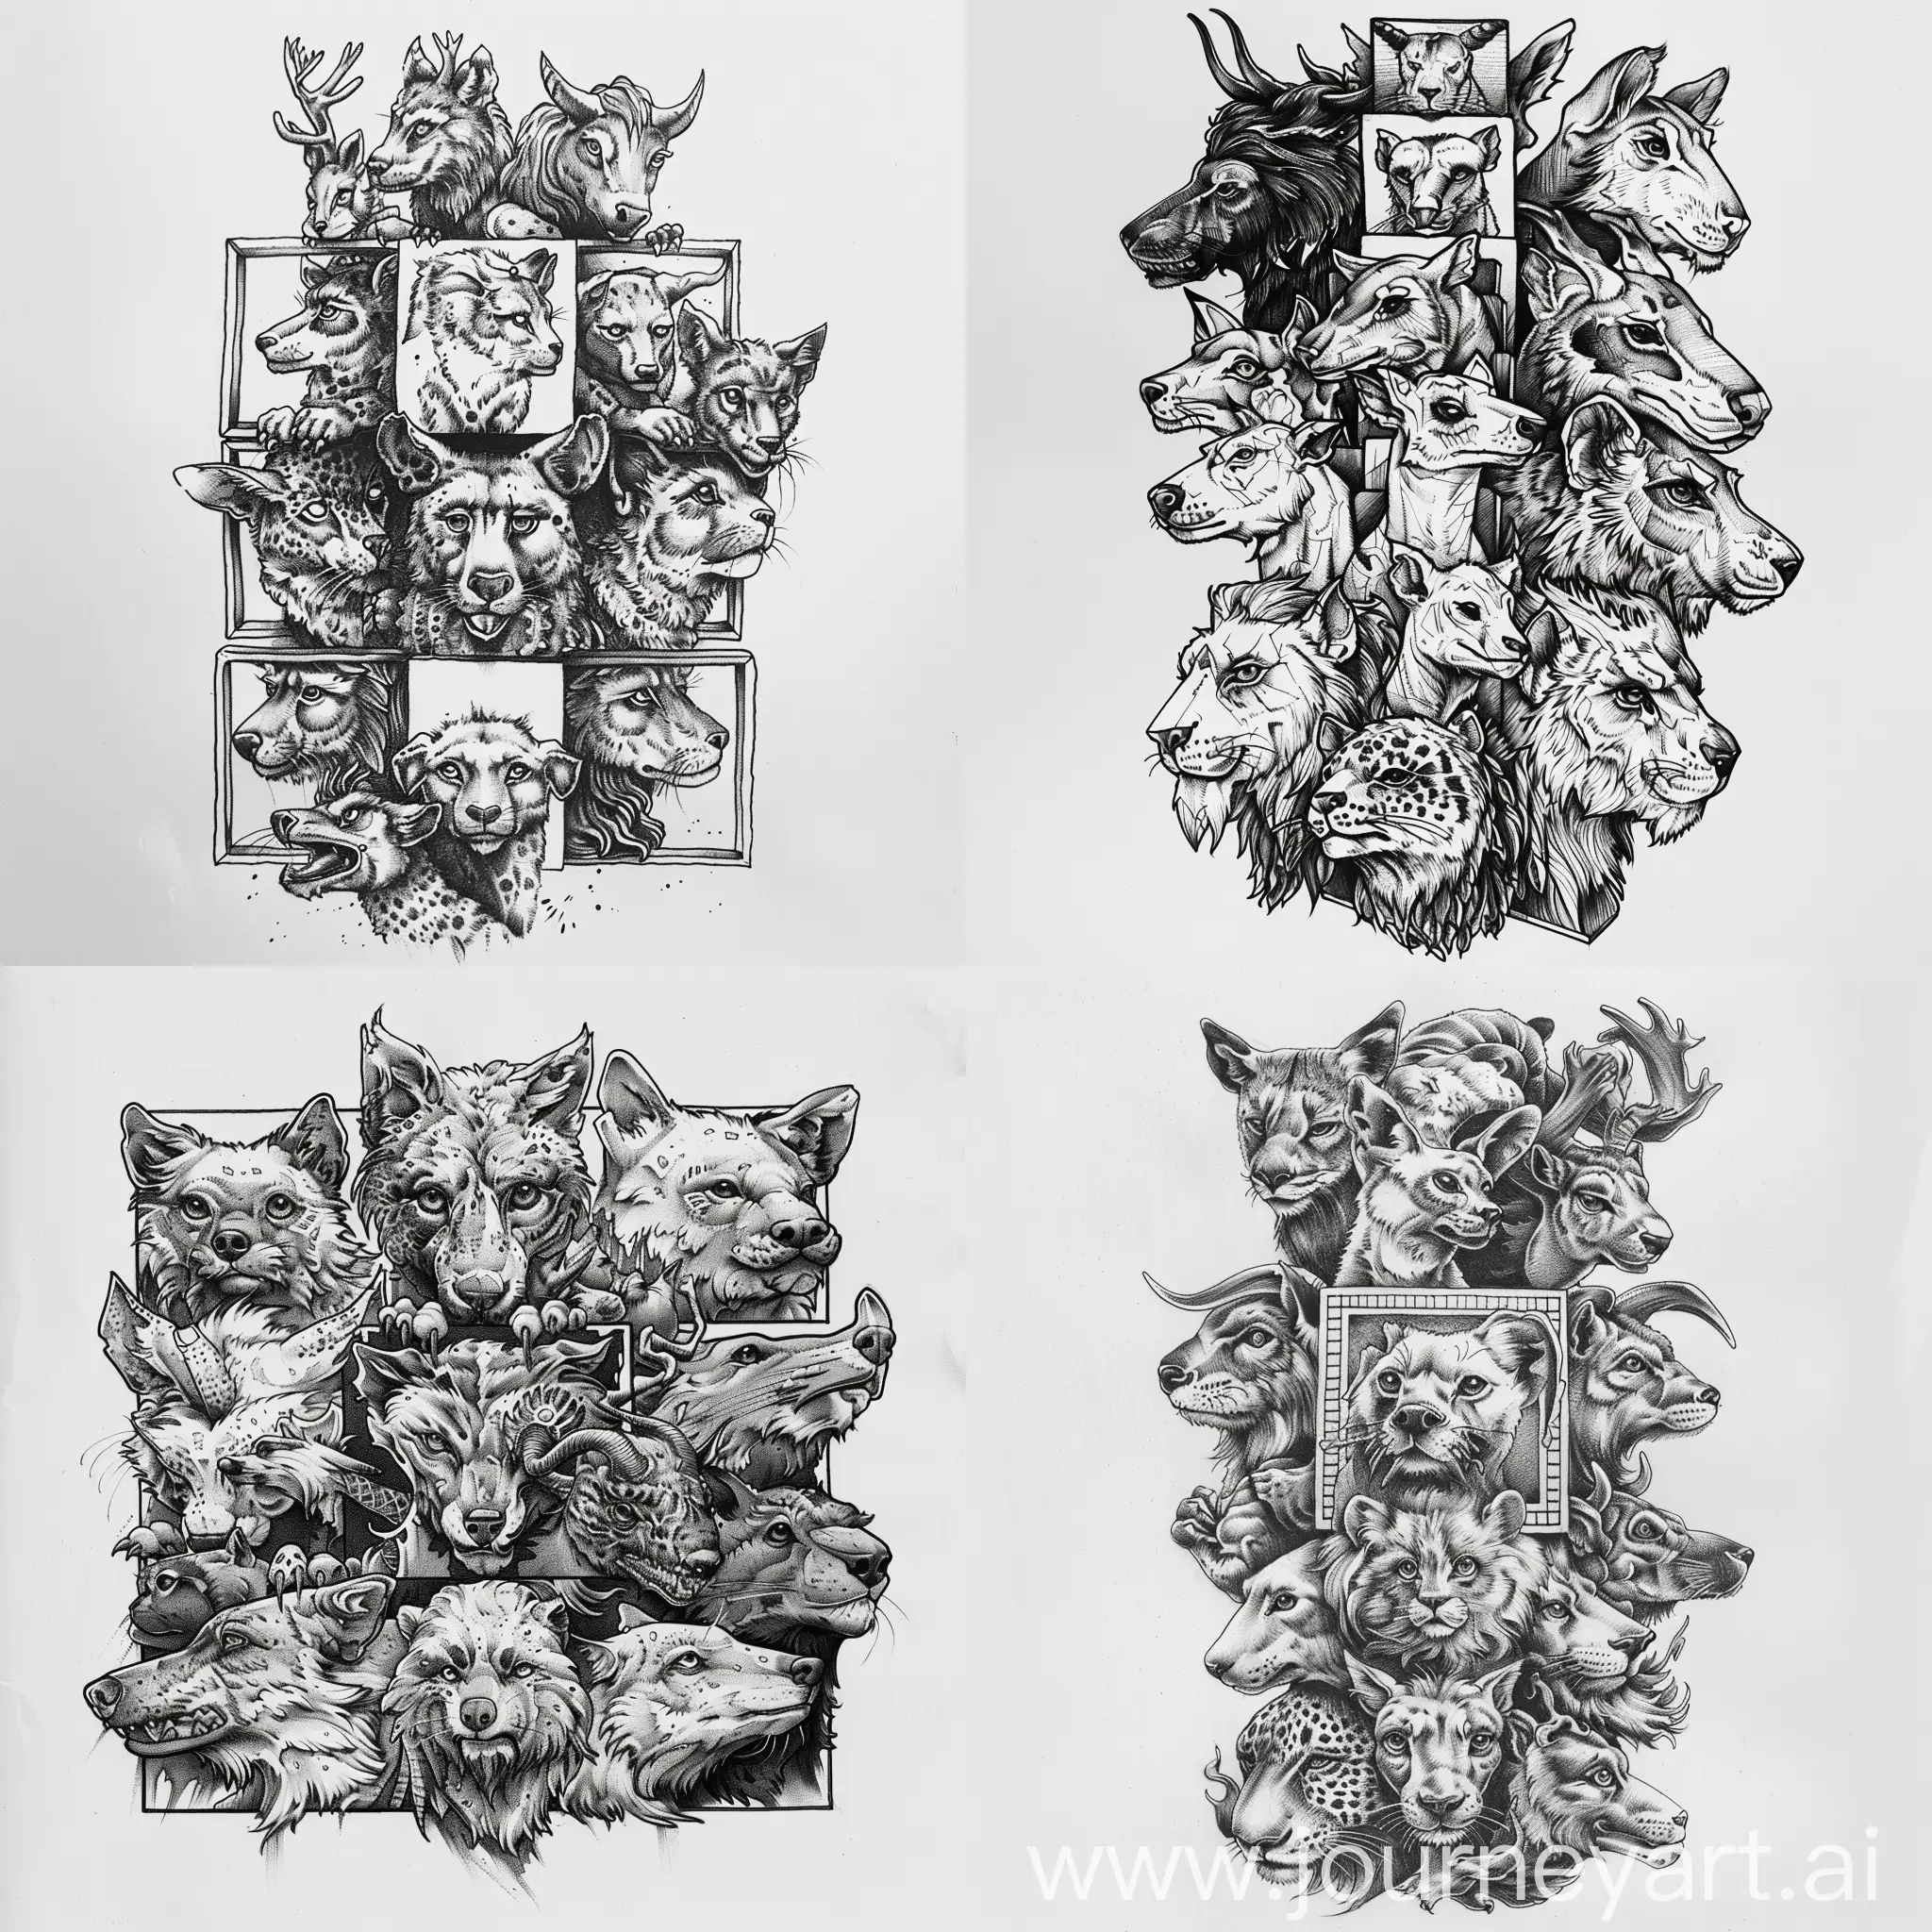 Monochrome-Tattoo-Sketch-Stacked-Animal-Totems-with-Square-Heads